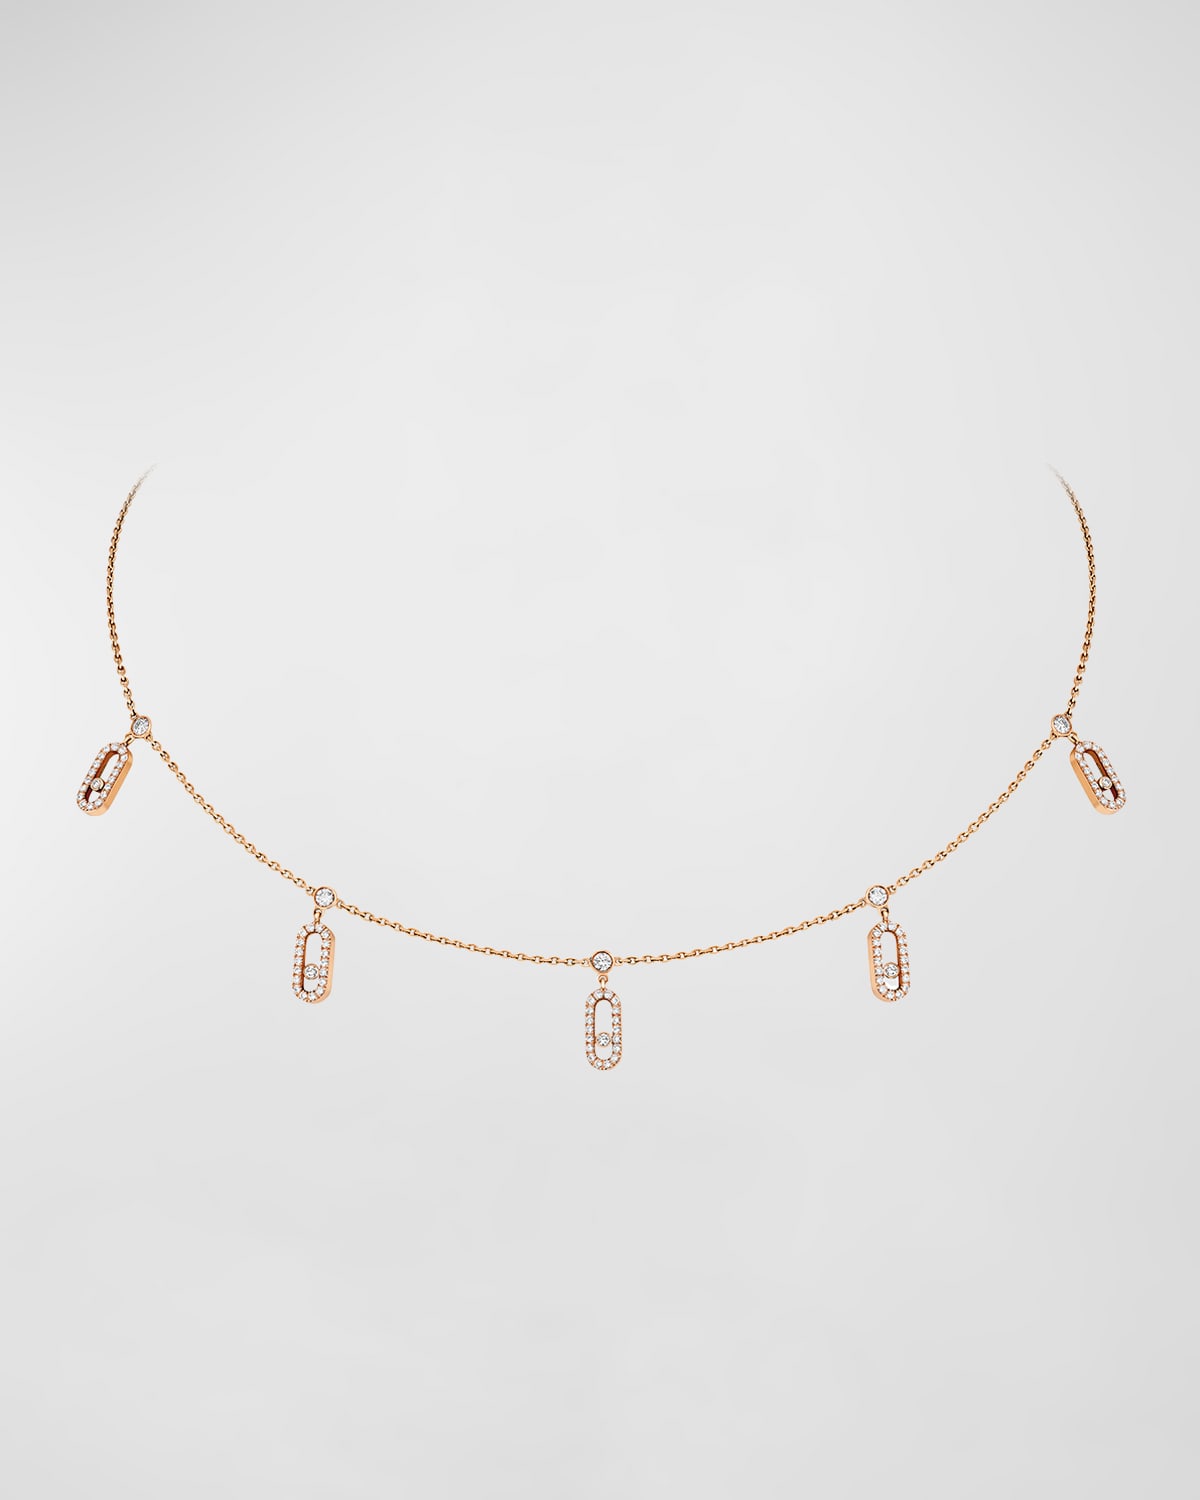 Messika Move Uno 18k Rose Gold Tassel Pave Choker Necklace